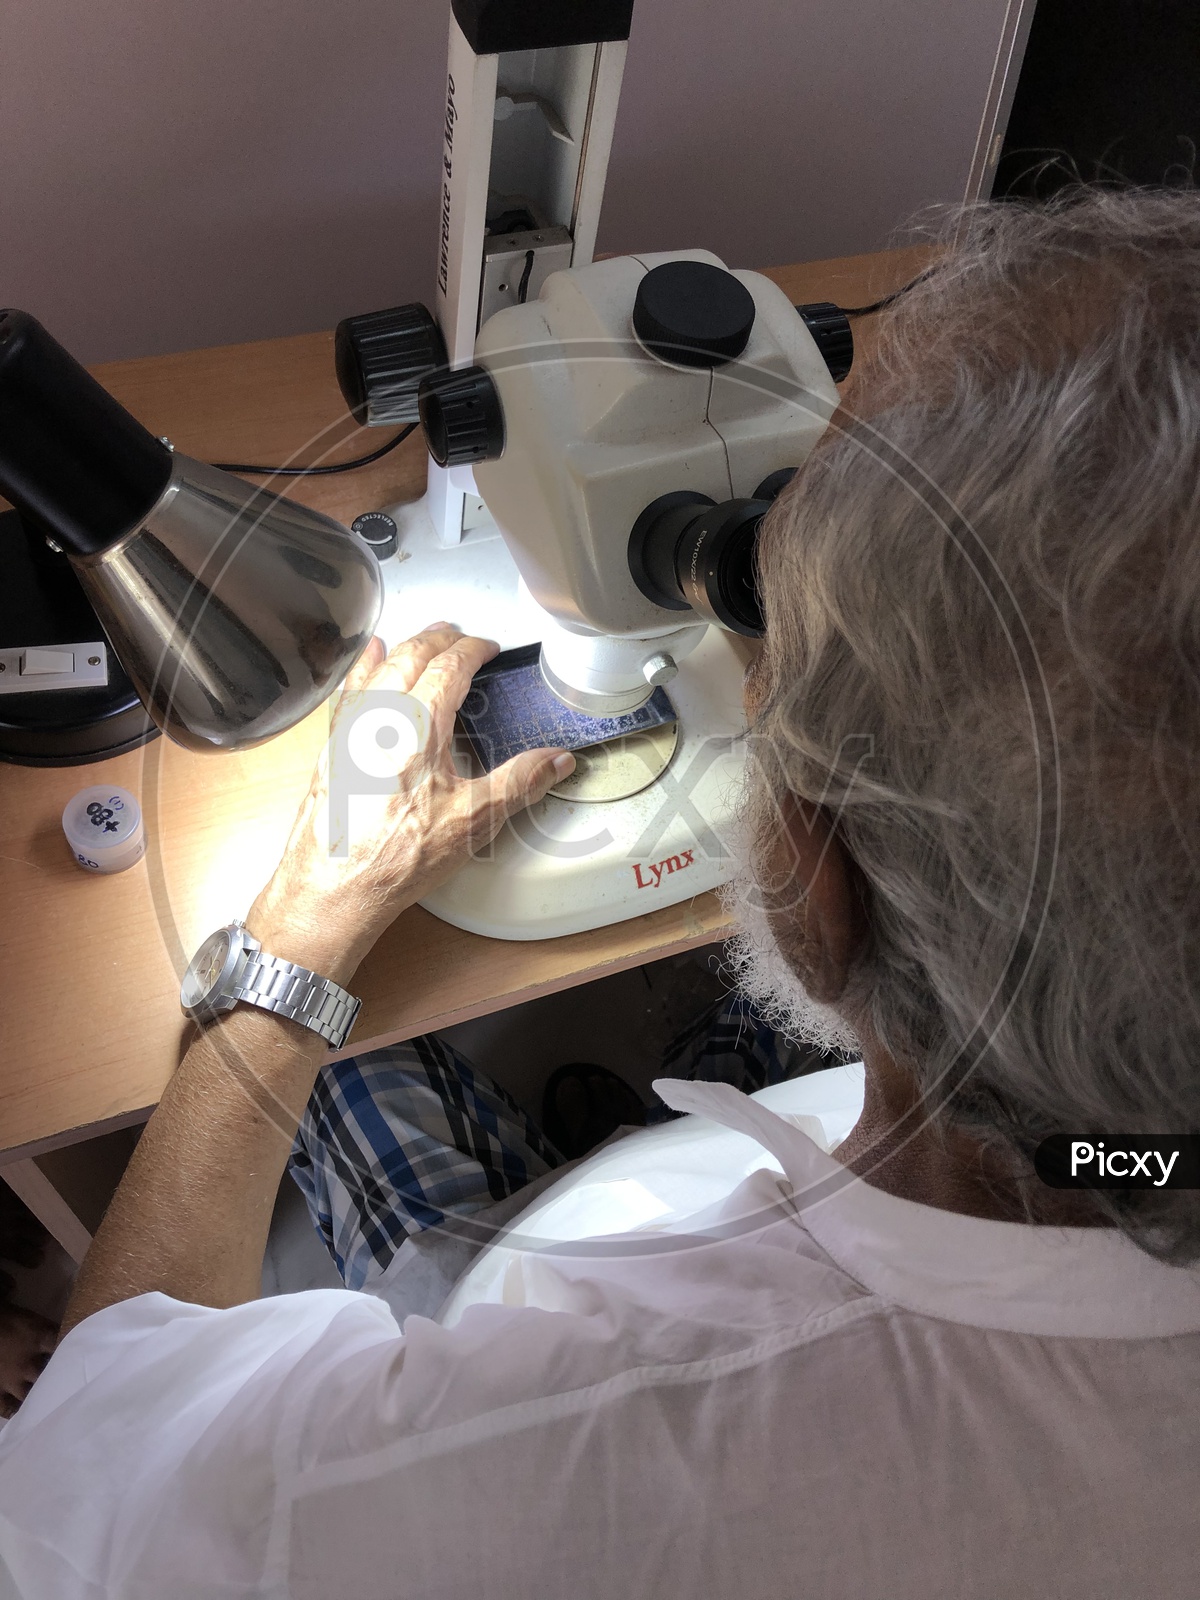 A Scientist during micropaleontological study